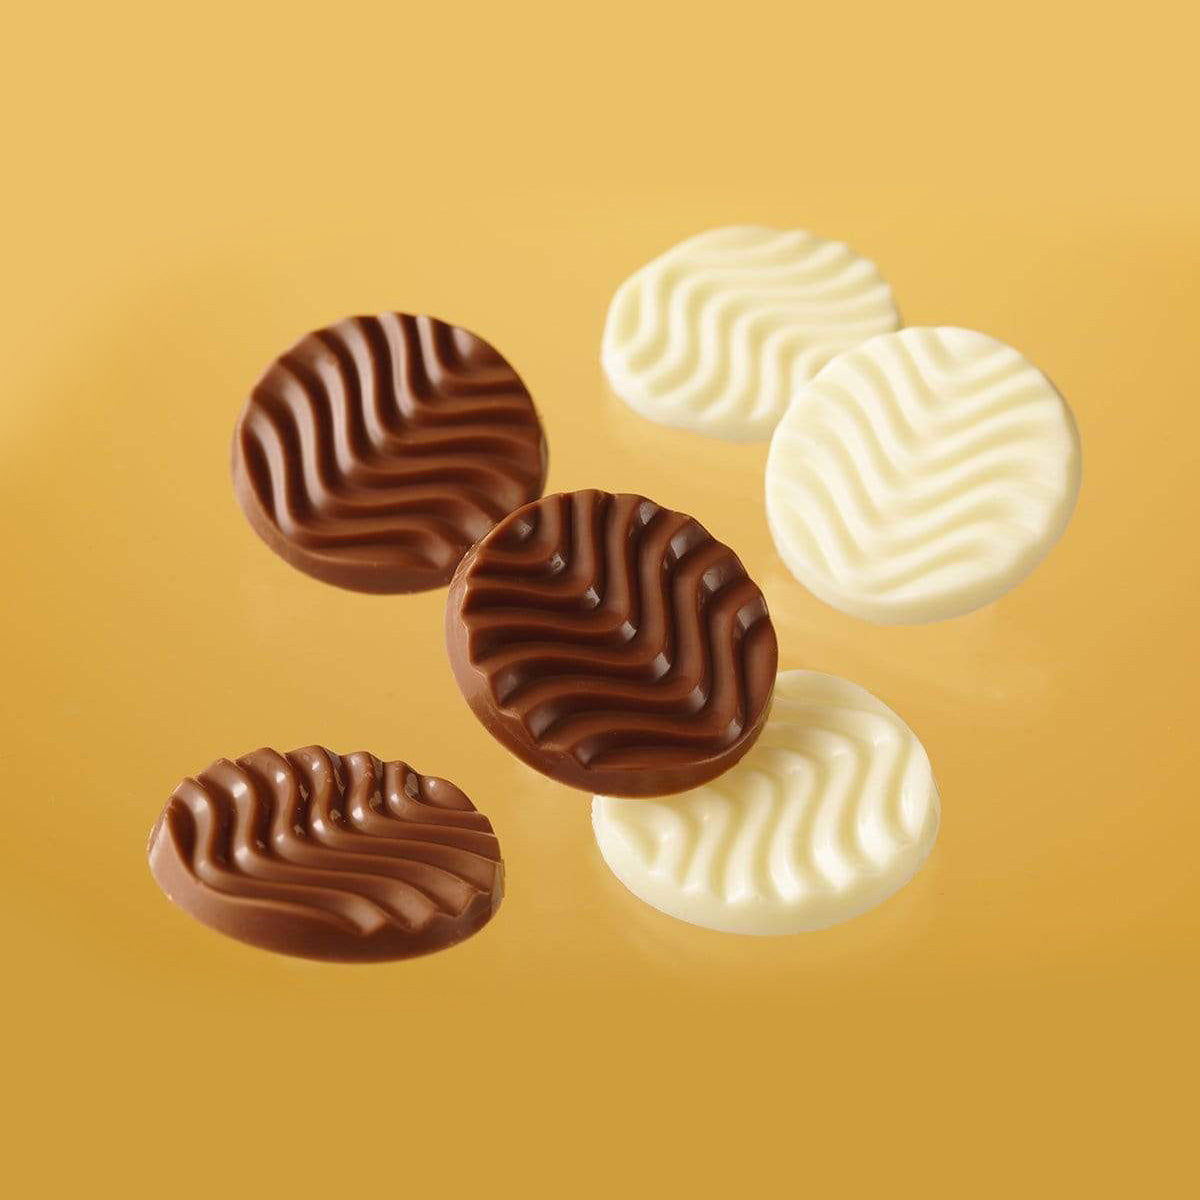 ROYCE' Chocolate - Pure Chocolate "Caramel Milk & Creamy White" - Image shows brown and white chocolate discs with a waved texture. Background is in yellow color.